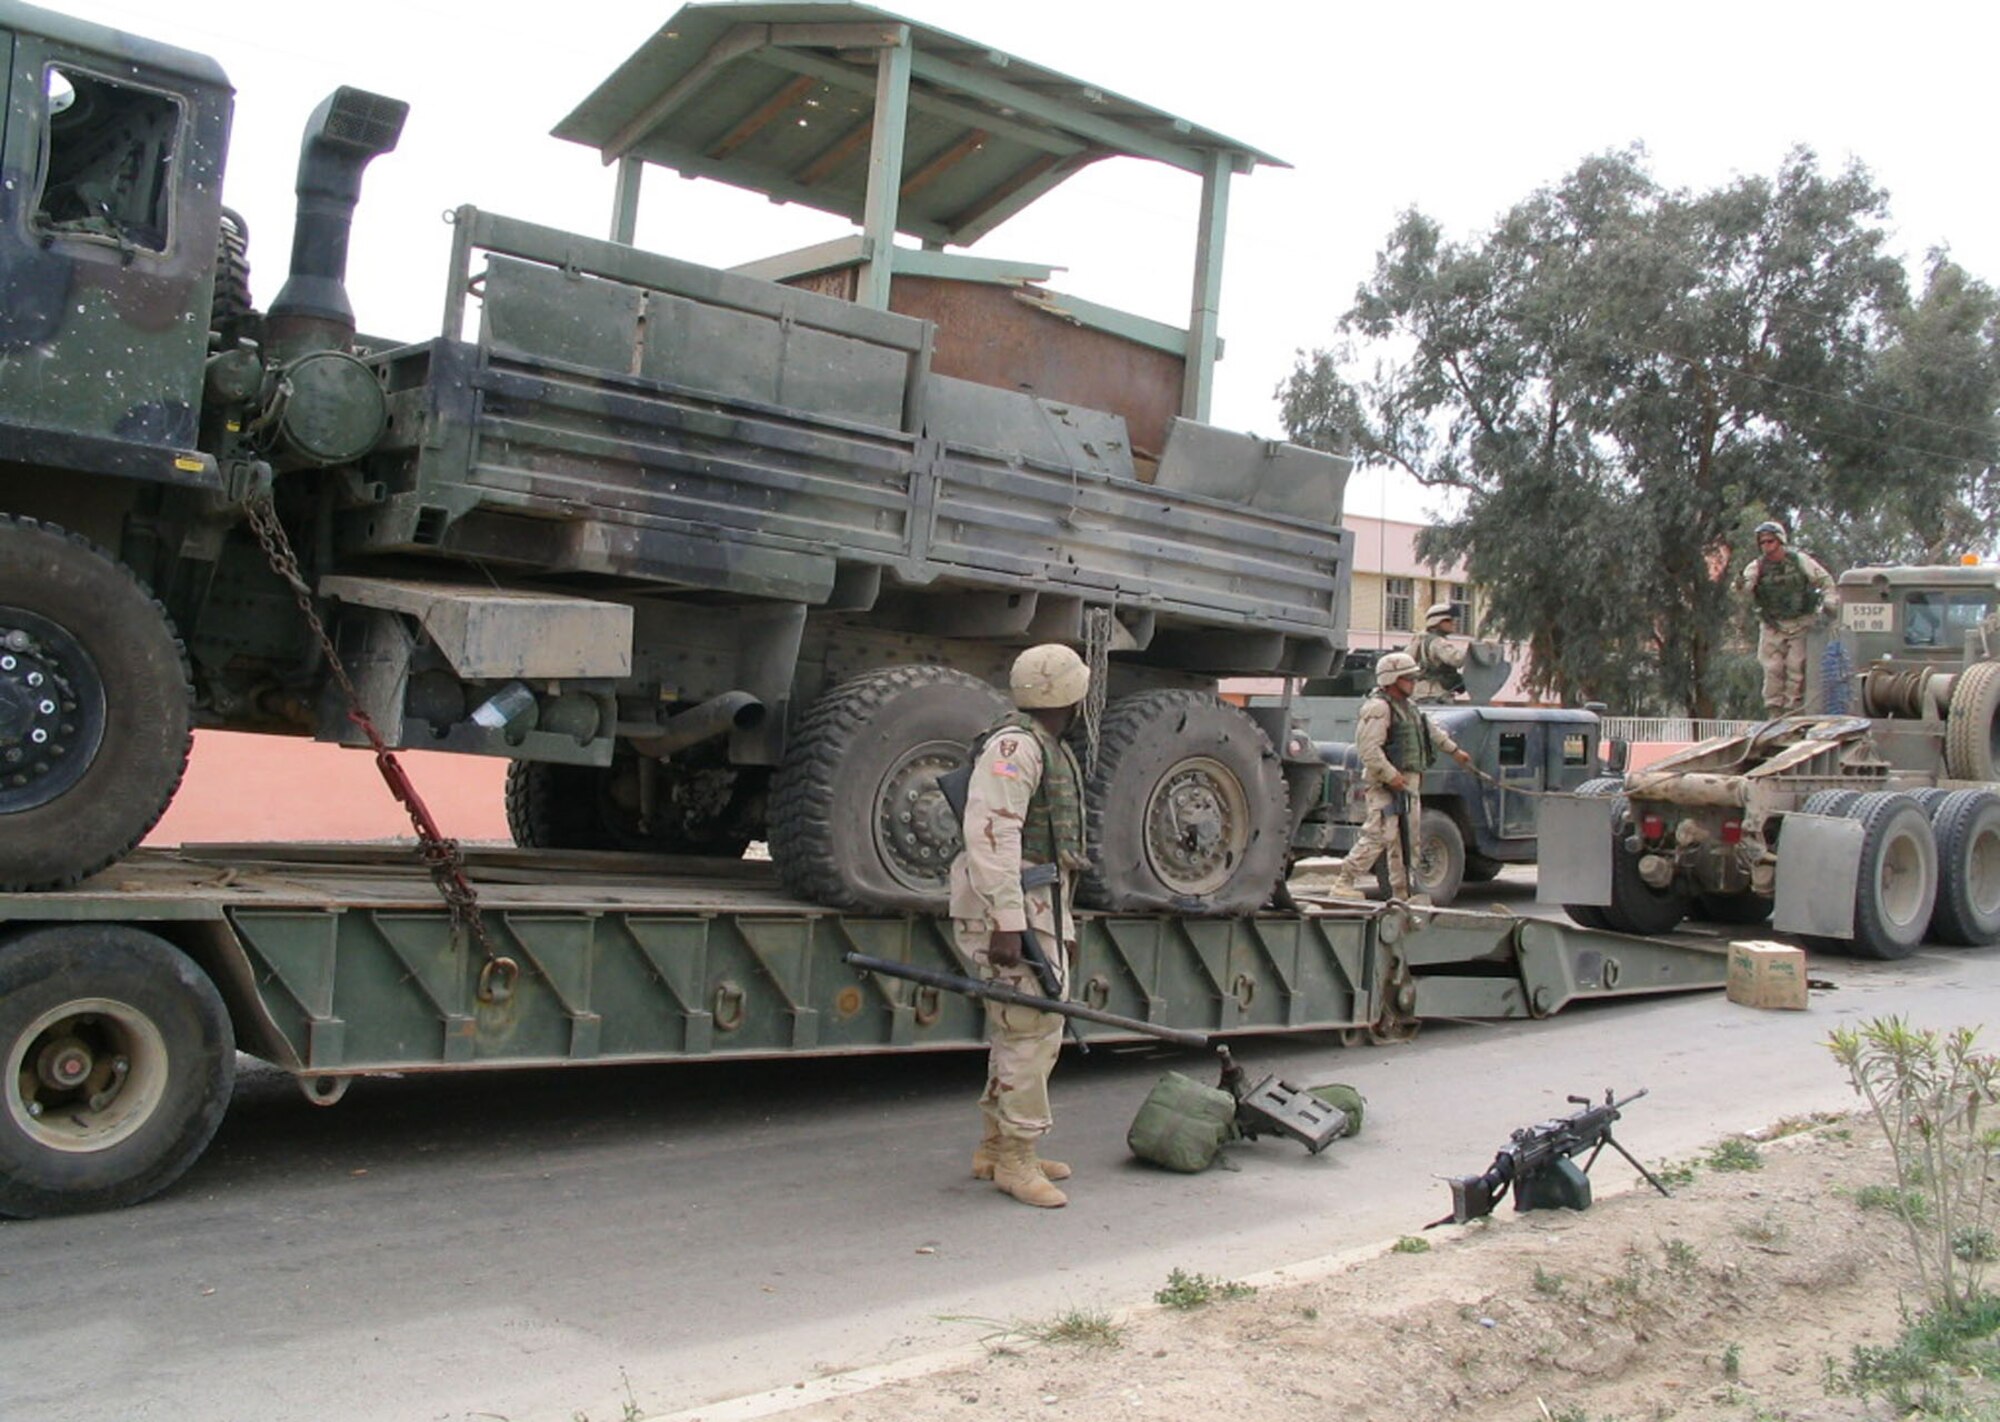 Though an IED damaged this gun truck, the fragments did not penetrate the armored gun position on the bed. (U.S. Air Force photo)